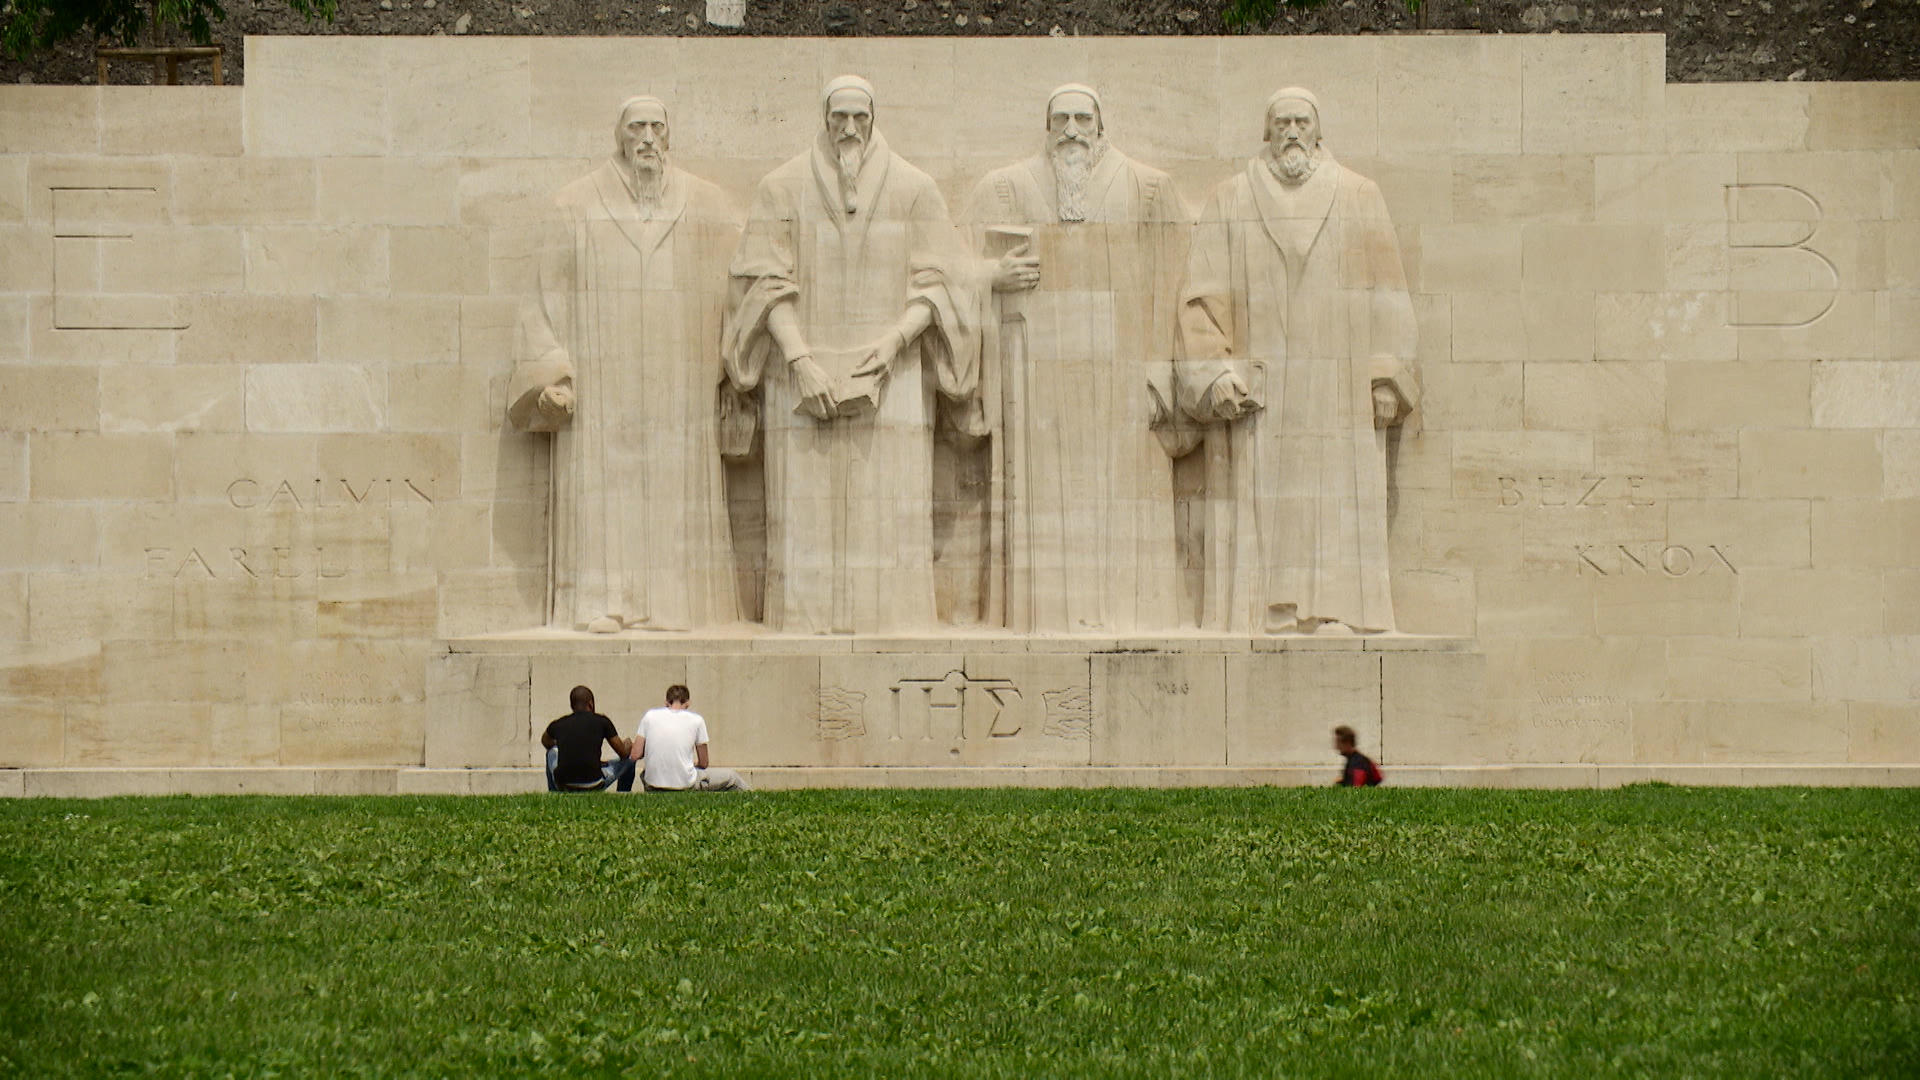 The Reformation Wall in Geneva